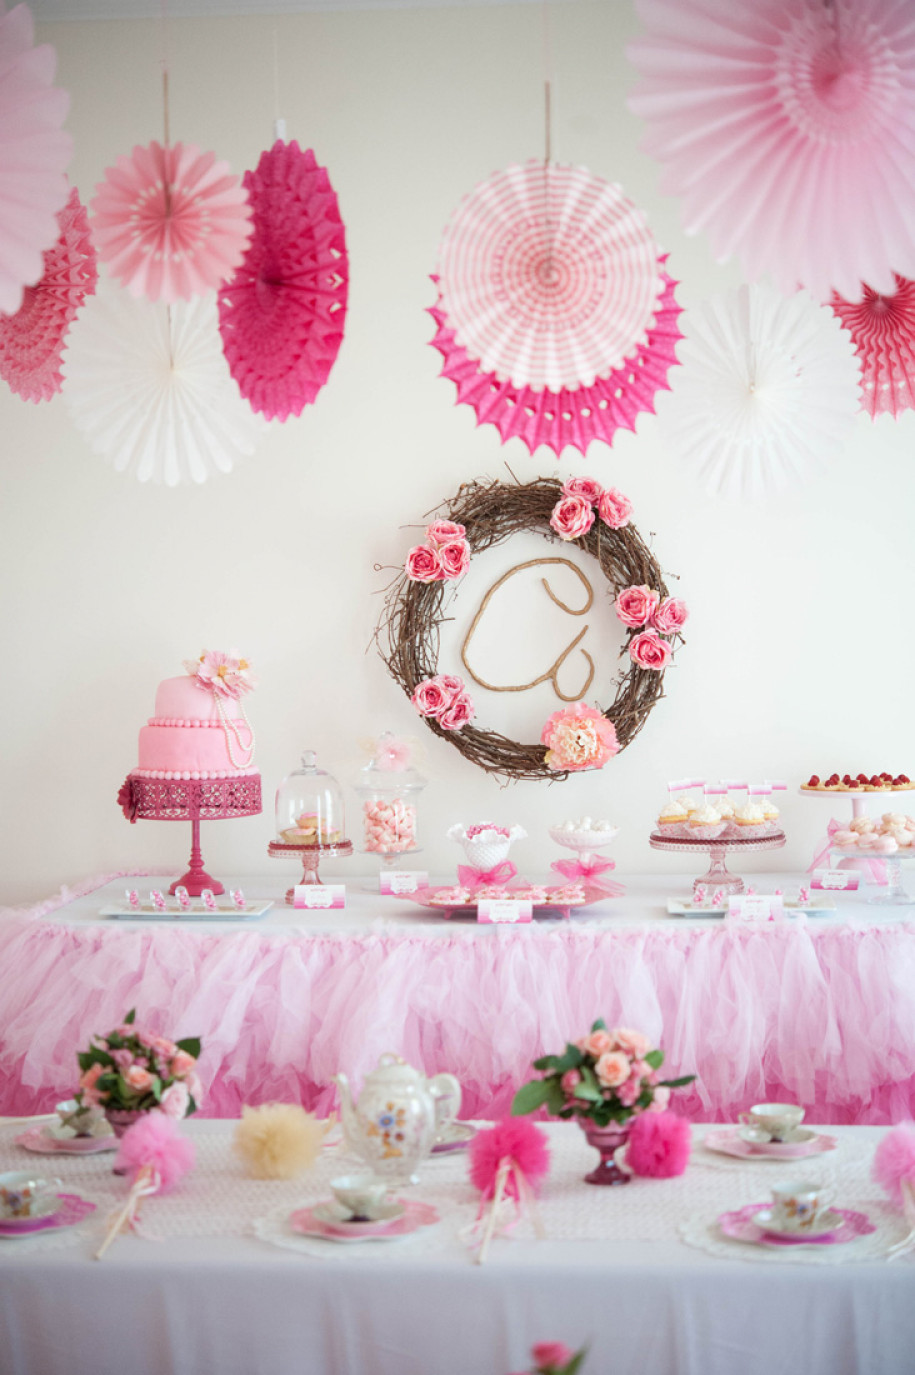 Princess Birthday Party Decorations
 A Whimsical & Sweet Ombre Princess Party Anders Ruff